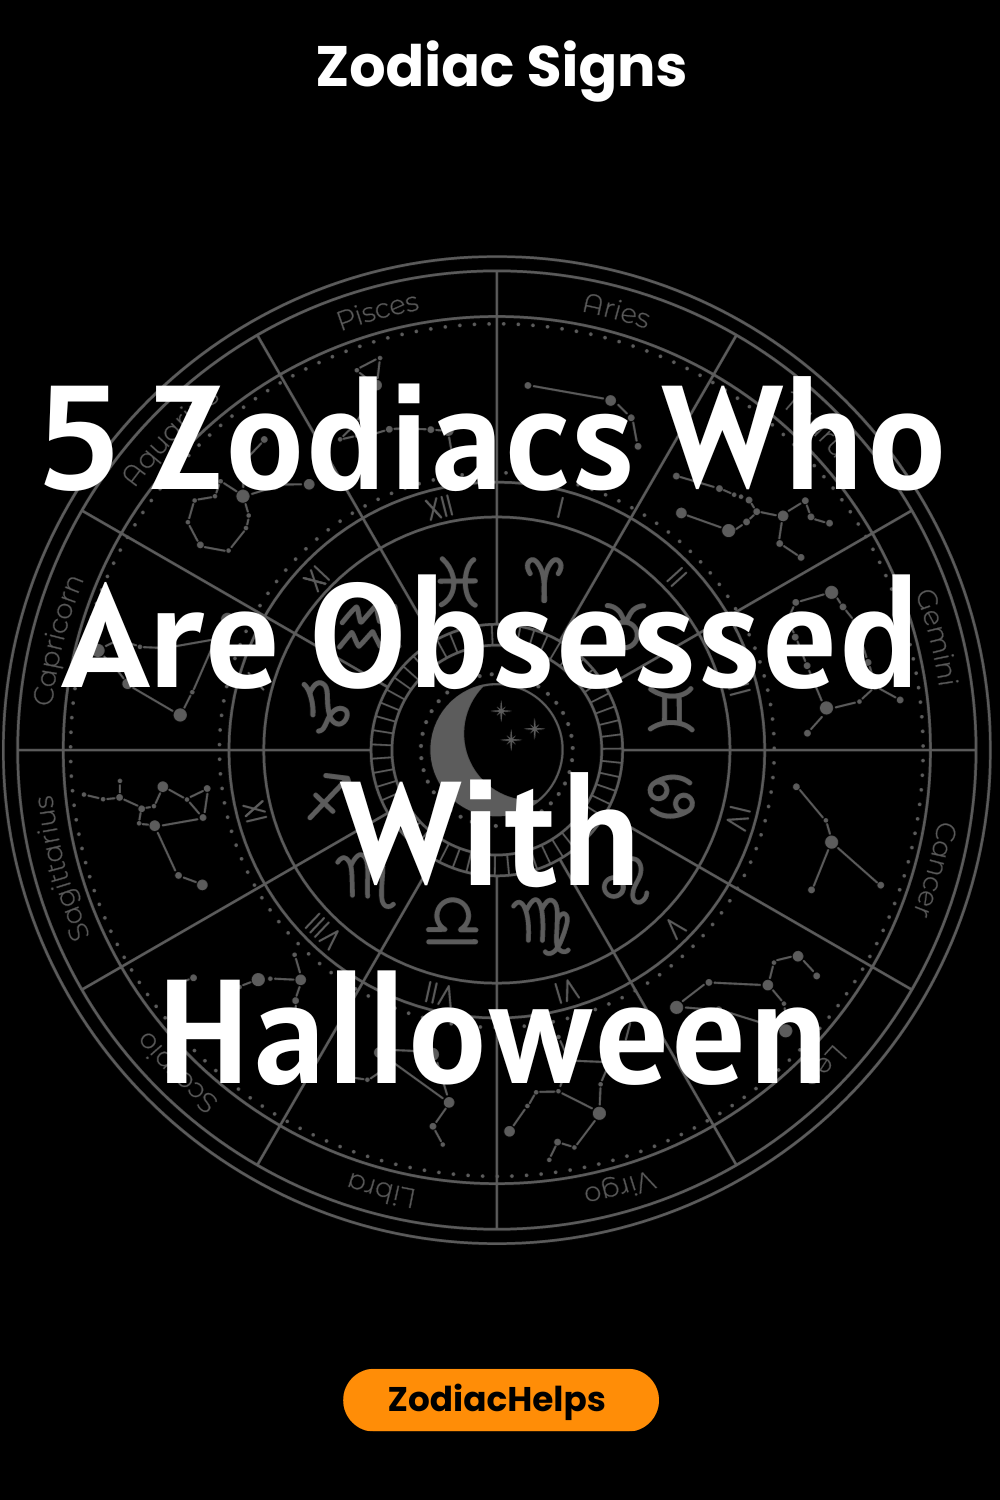 5 Zodiacs Who Are Obsessed With Halloween